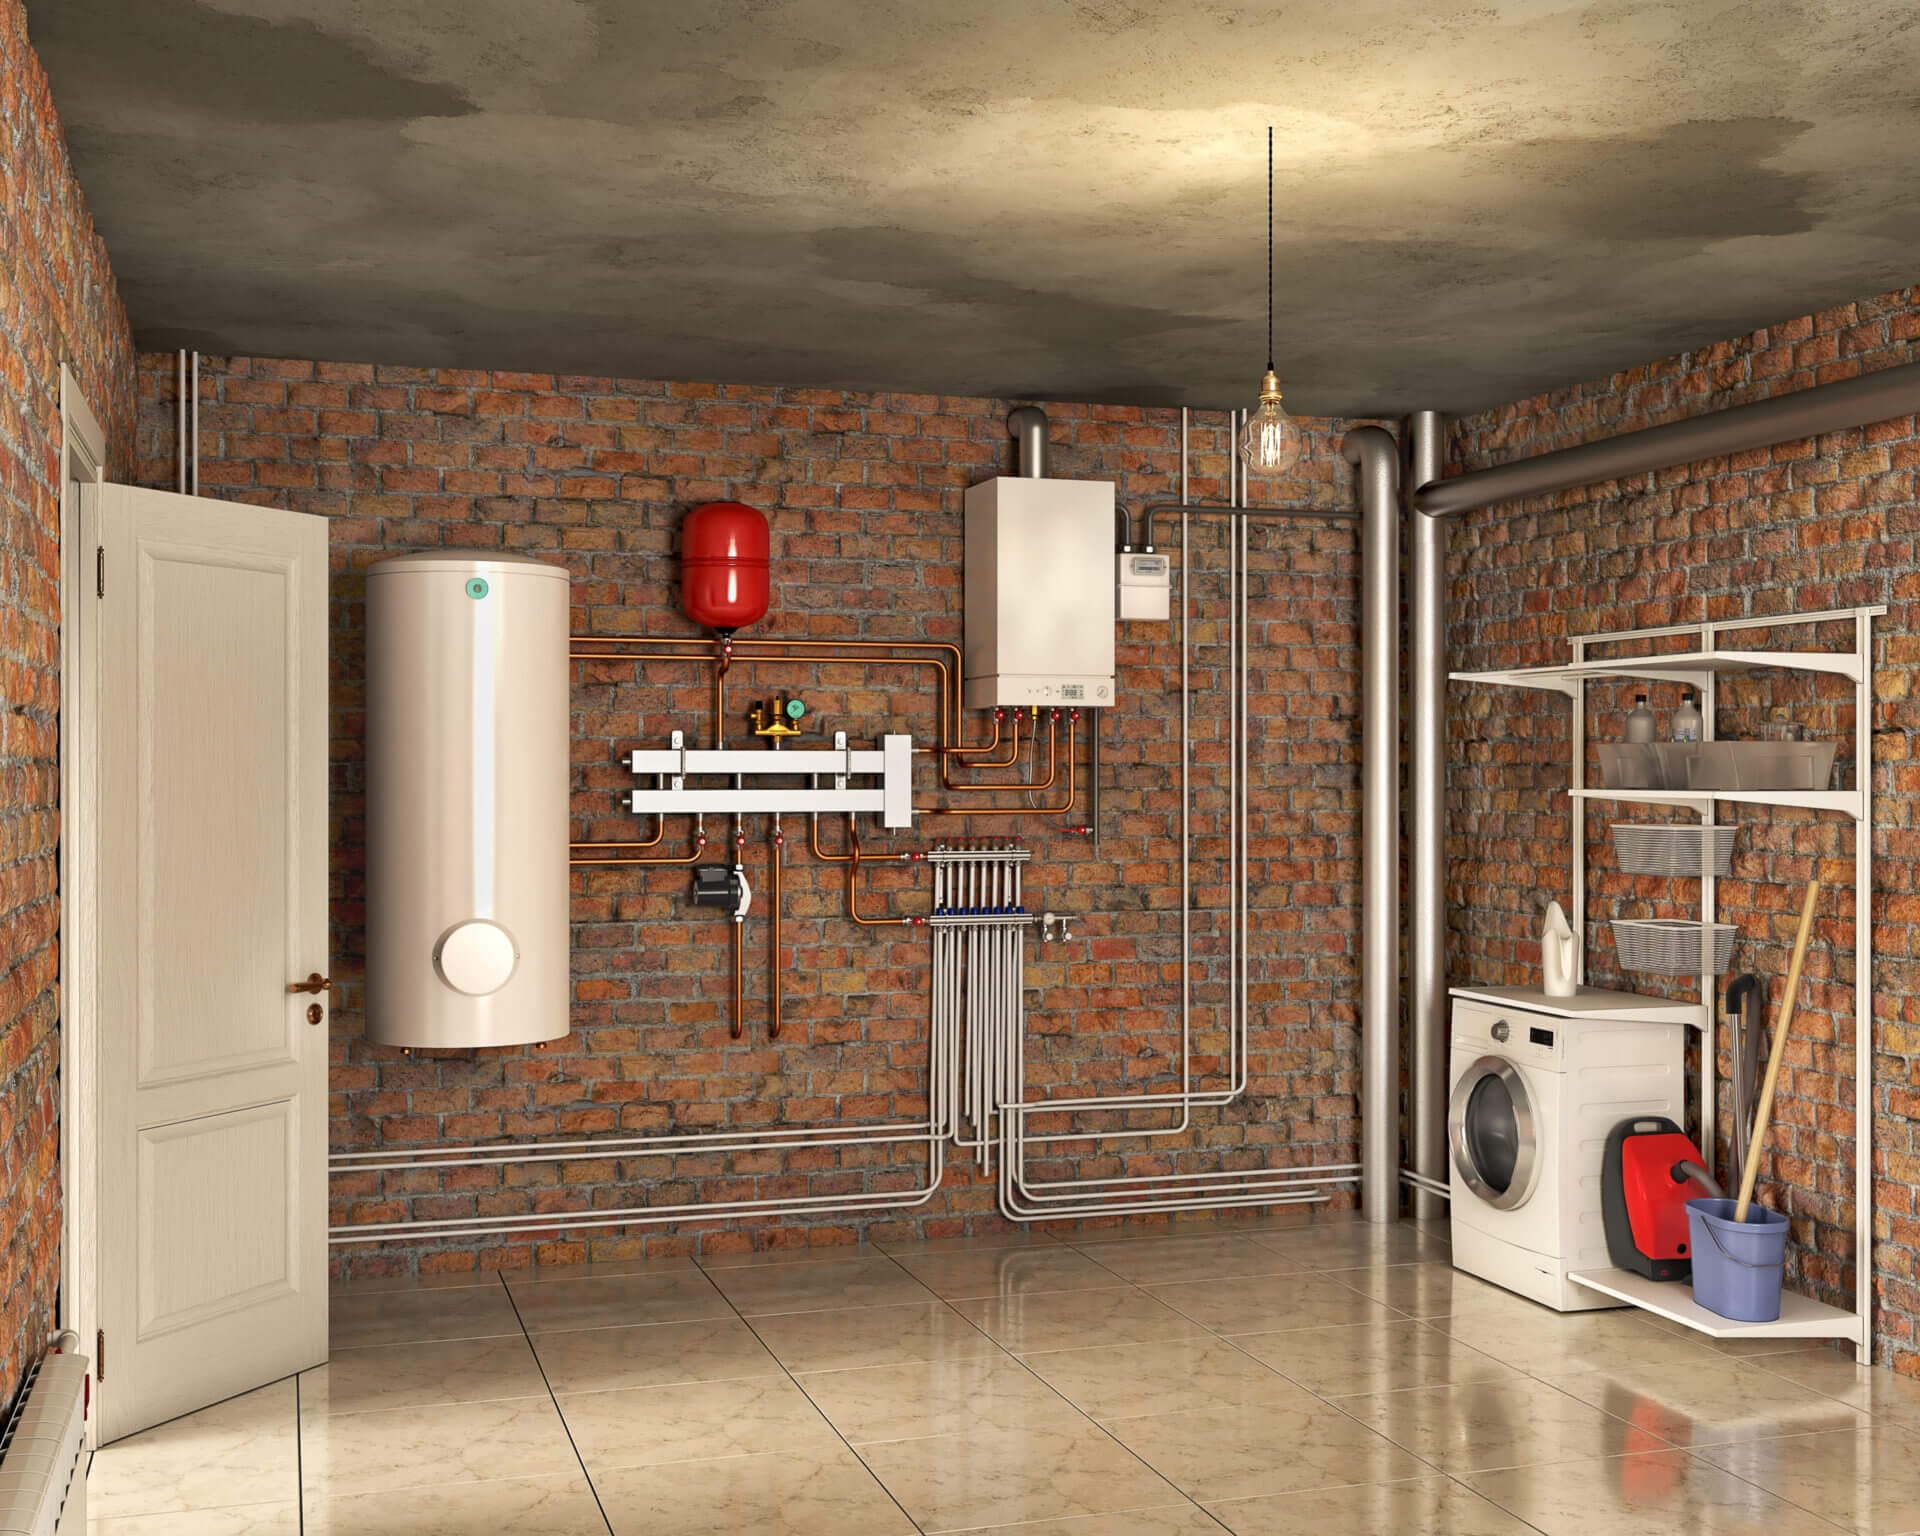 Basement system properly ran and organized to prevent future basement problems.